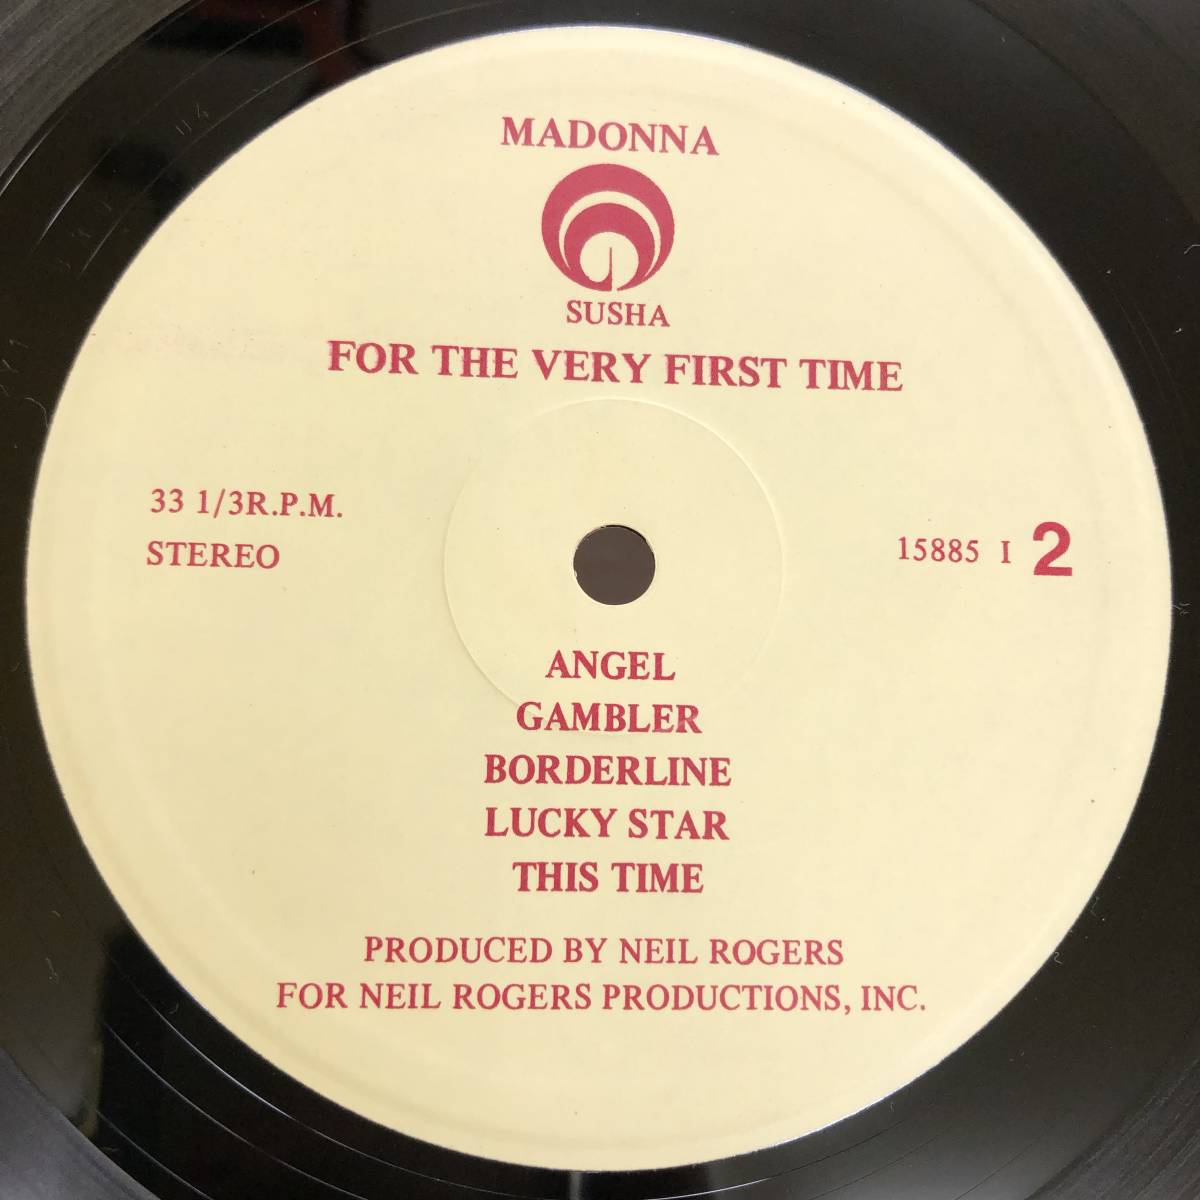 (LP) Madonna - For The Very First Time【15885 I】2枚組 マドンナ_画像4